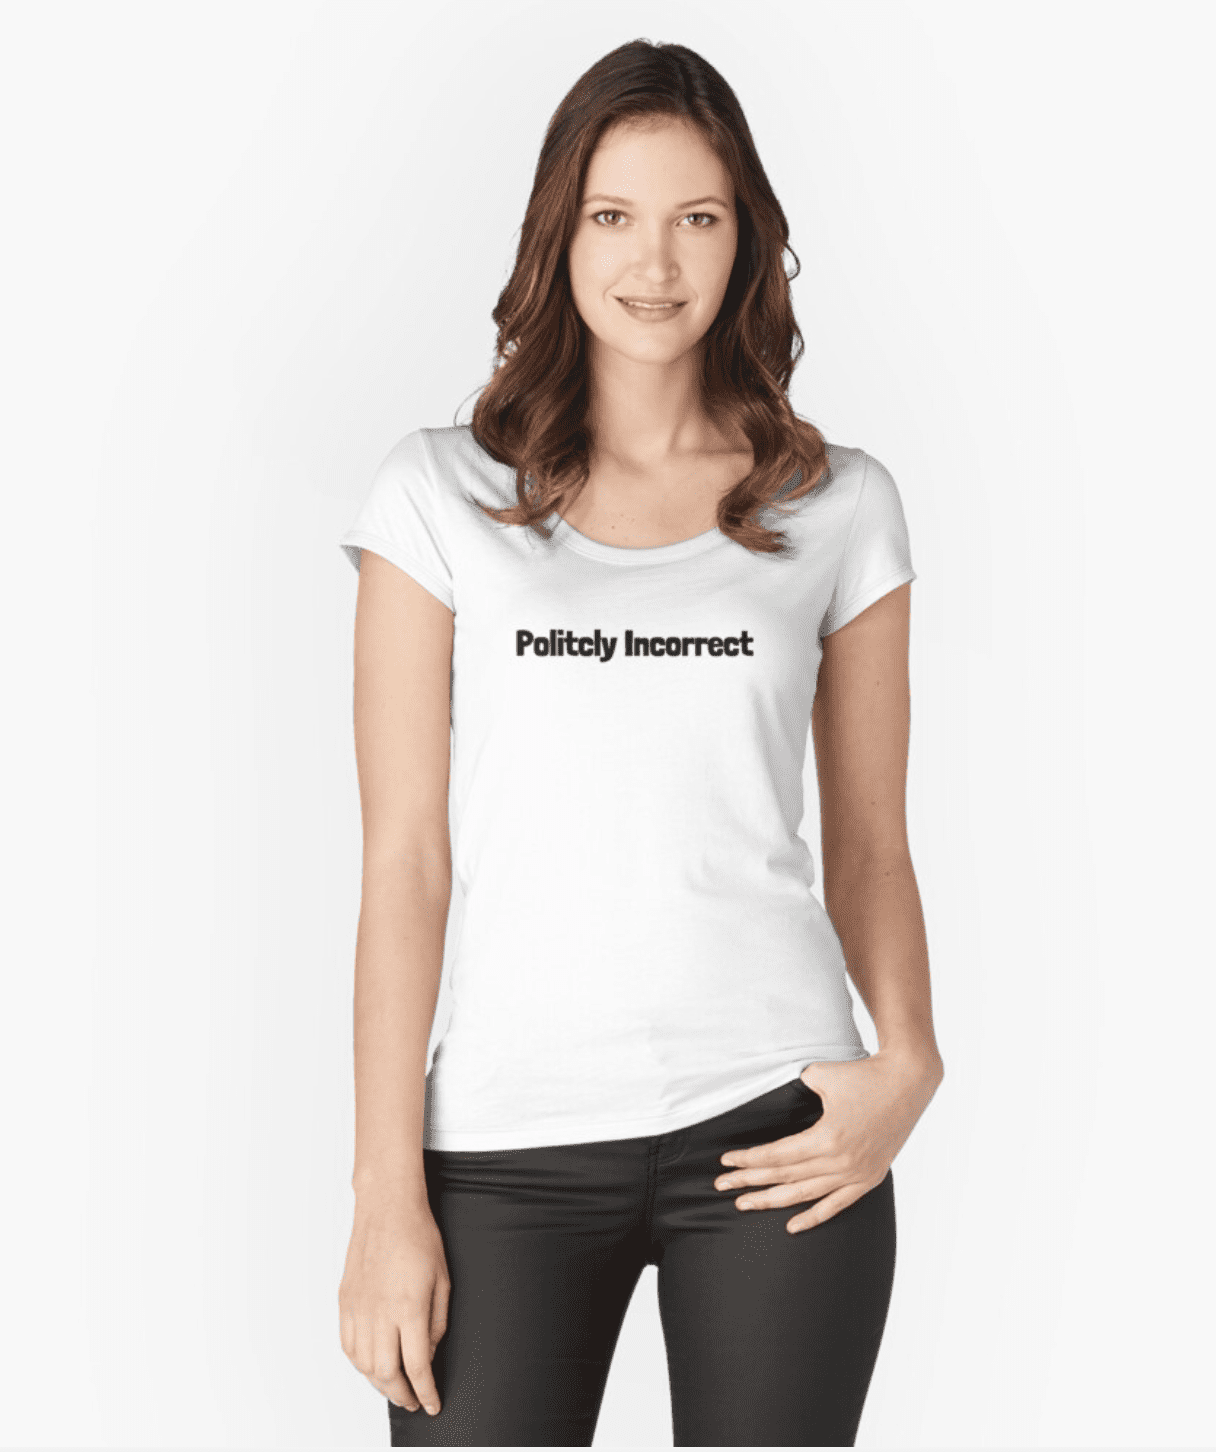 Politcly Incorrect – The Unique Style Fitted Scoop T-Shirt